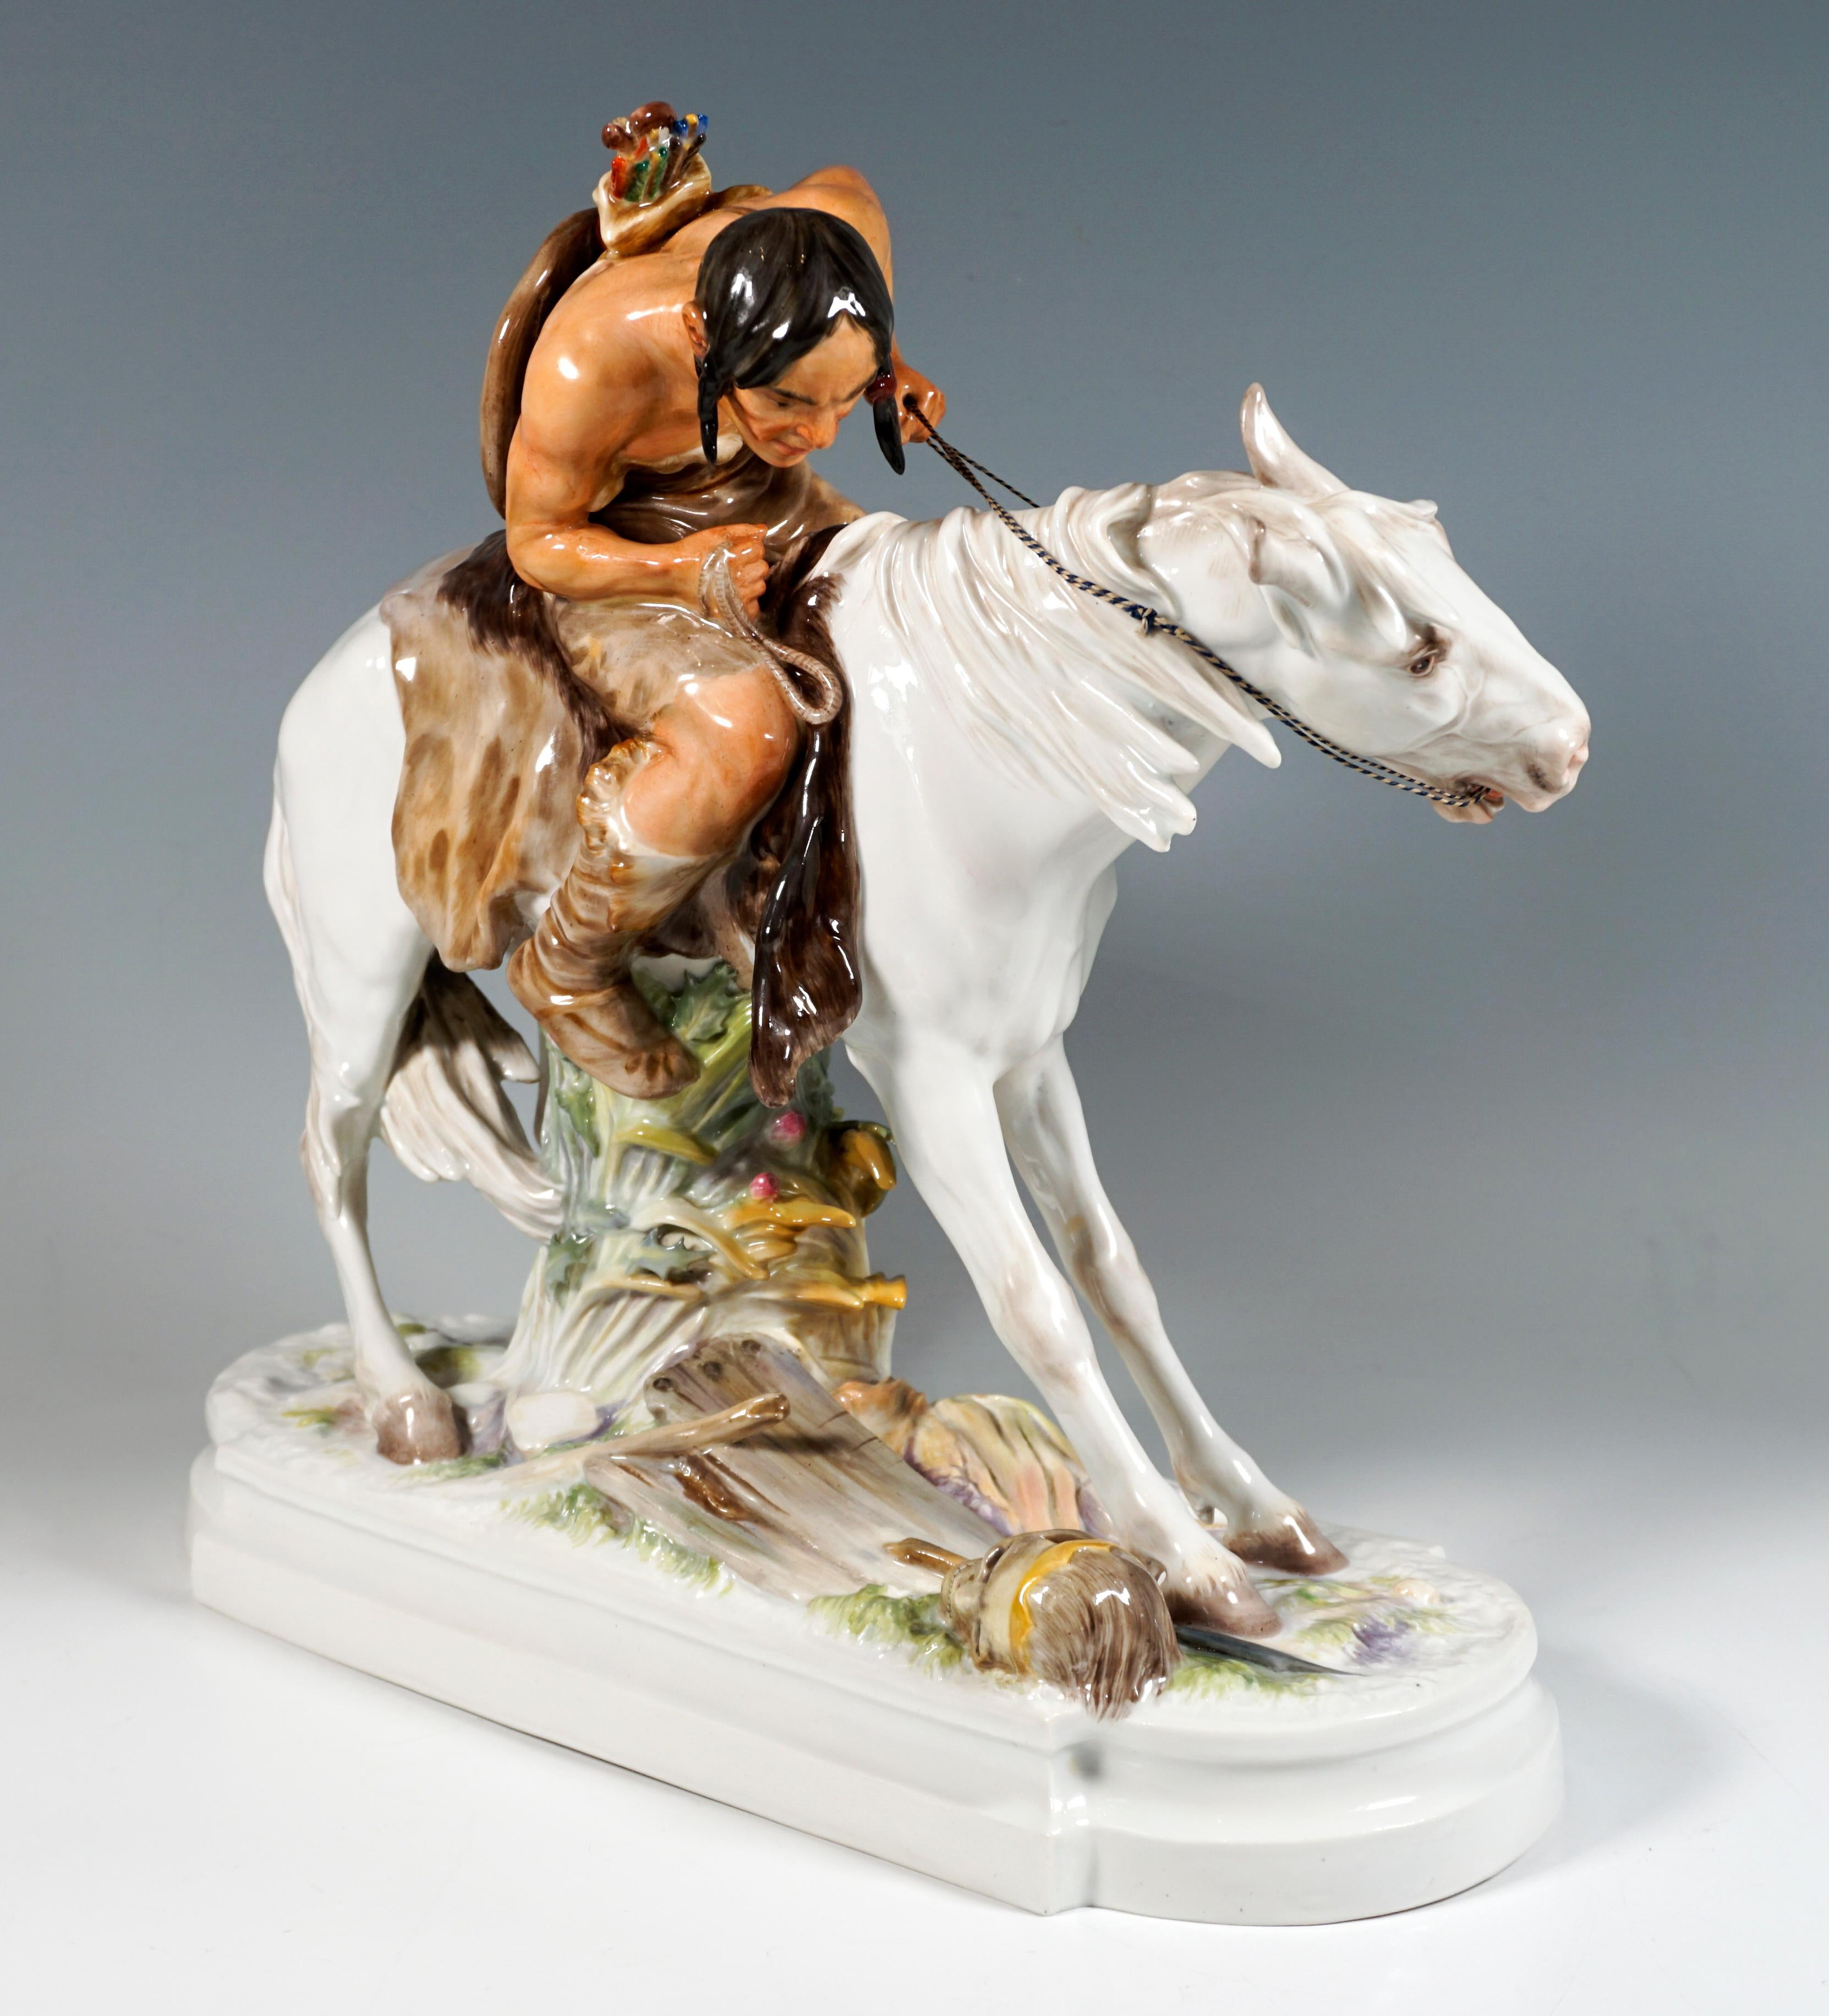 Exquisite Large Meissen Art Nouveau Porcelain Group:
Depiction of a mounted warrior, armed with shield and bow on his back, leaning from his horse to look down at a crowned skull. While the horse with stiff forelegs shies away from the gruesome